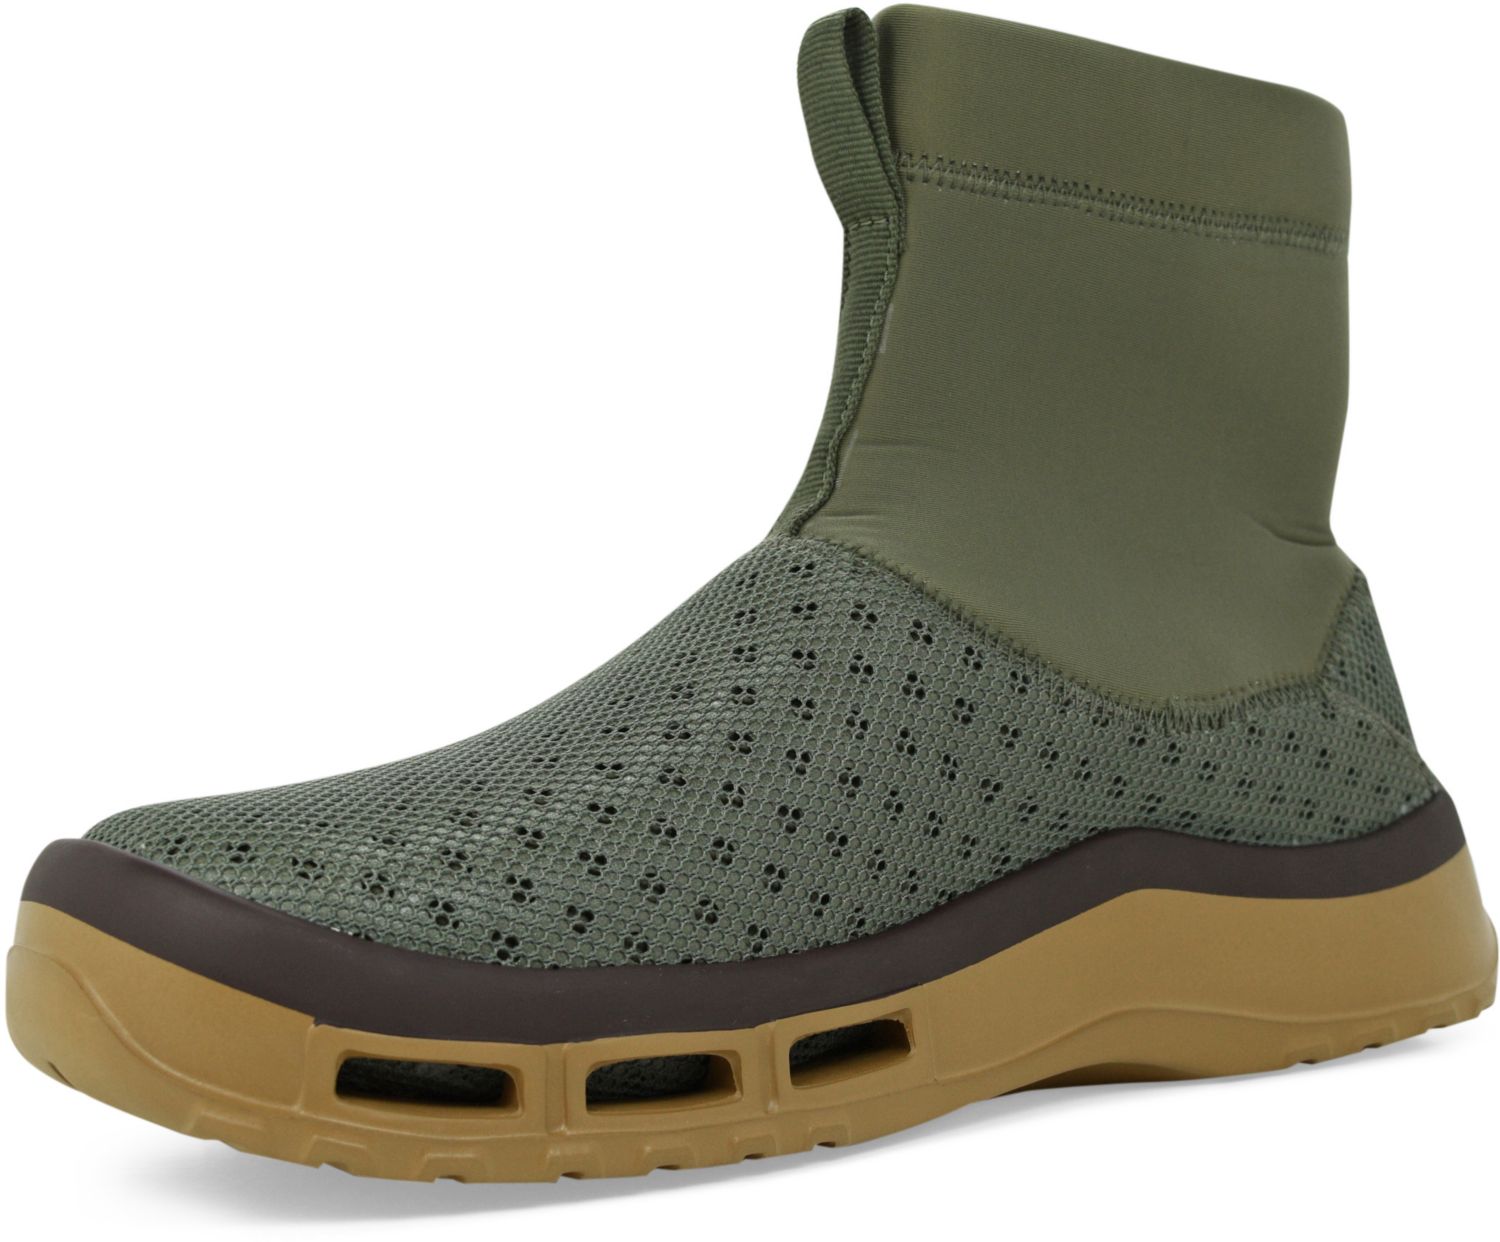 soft science fishing shoes on sale